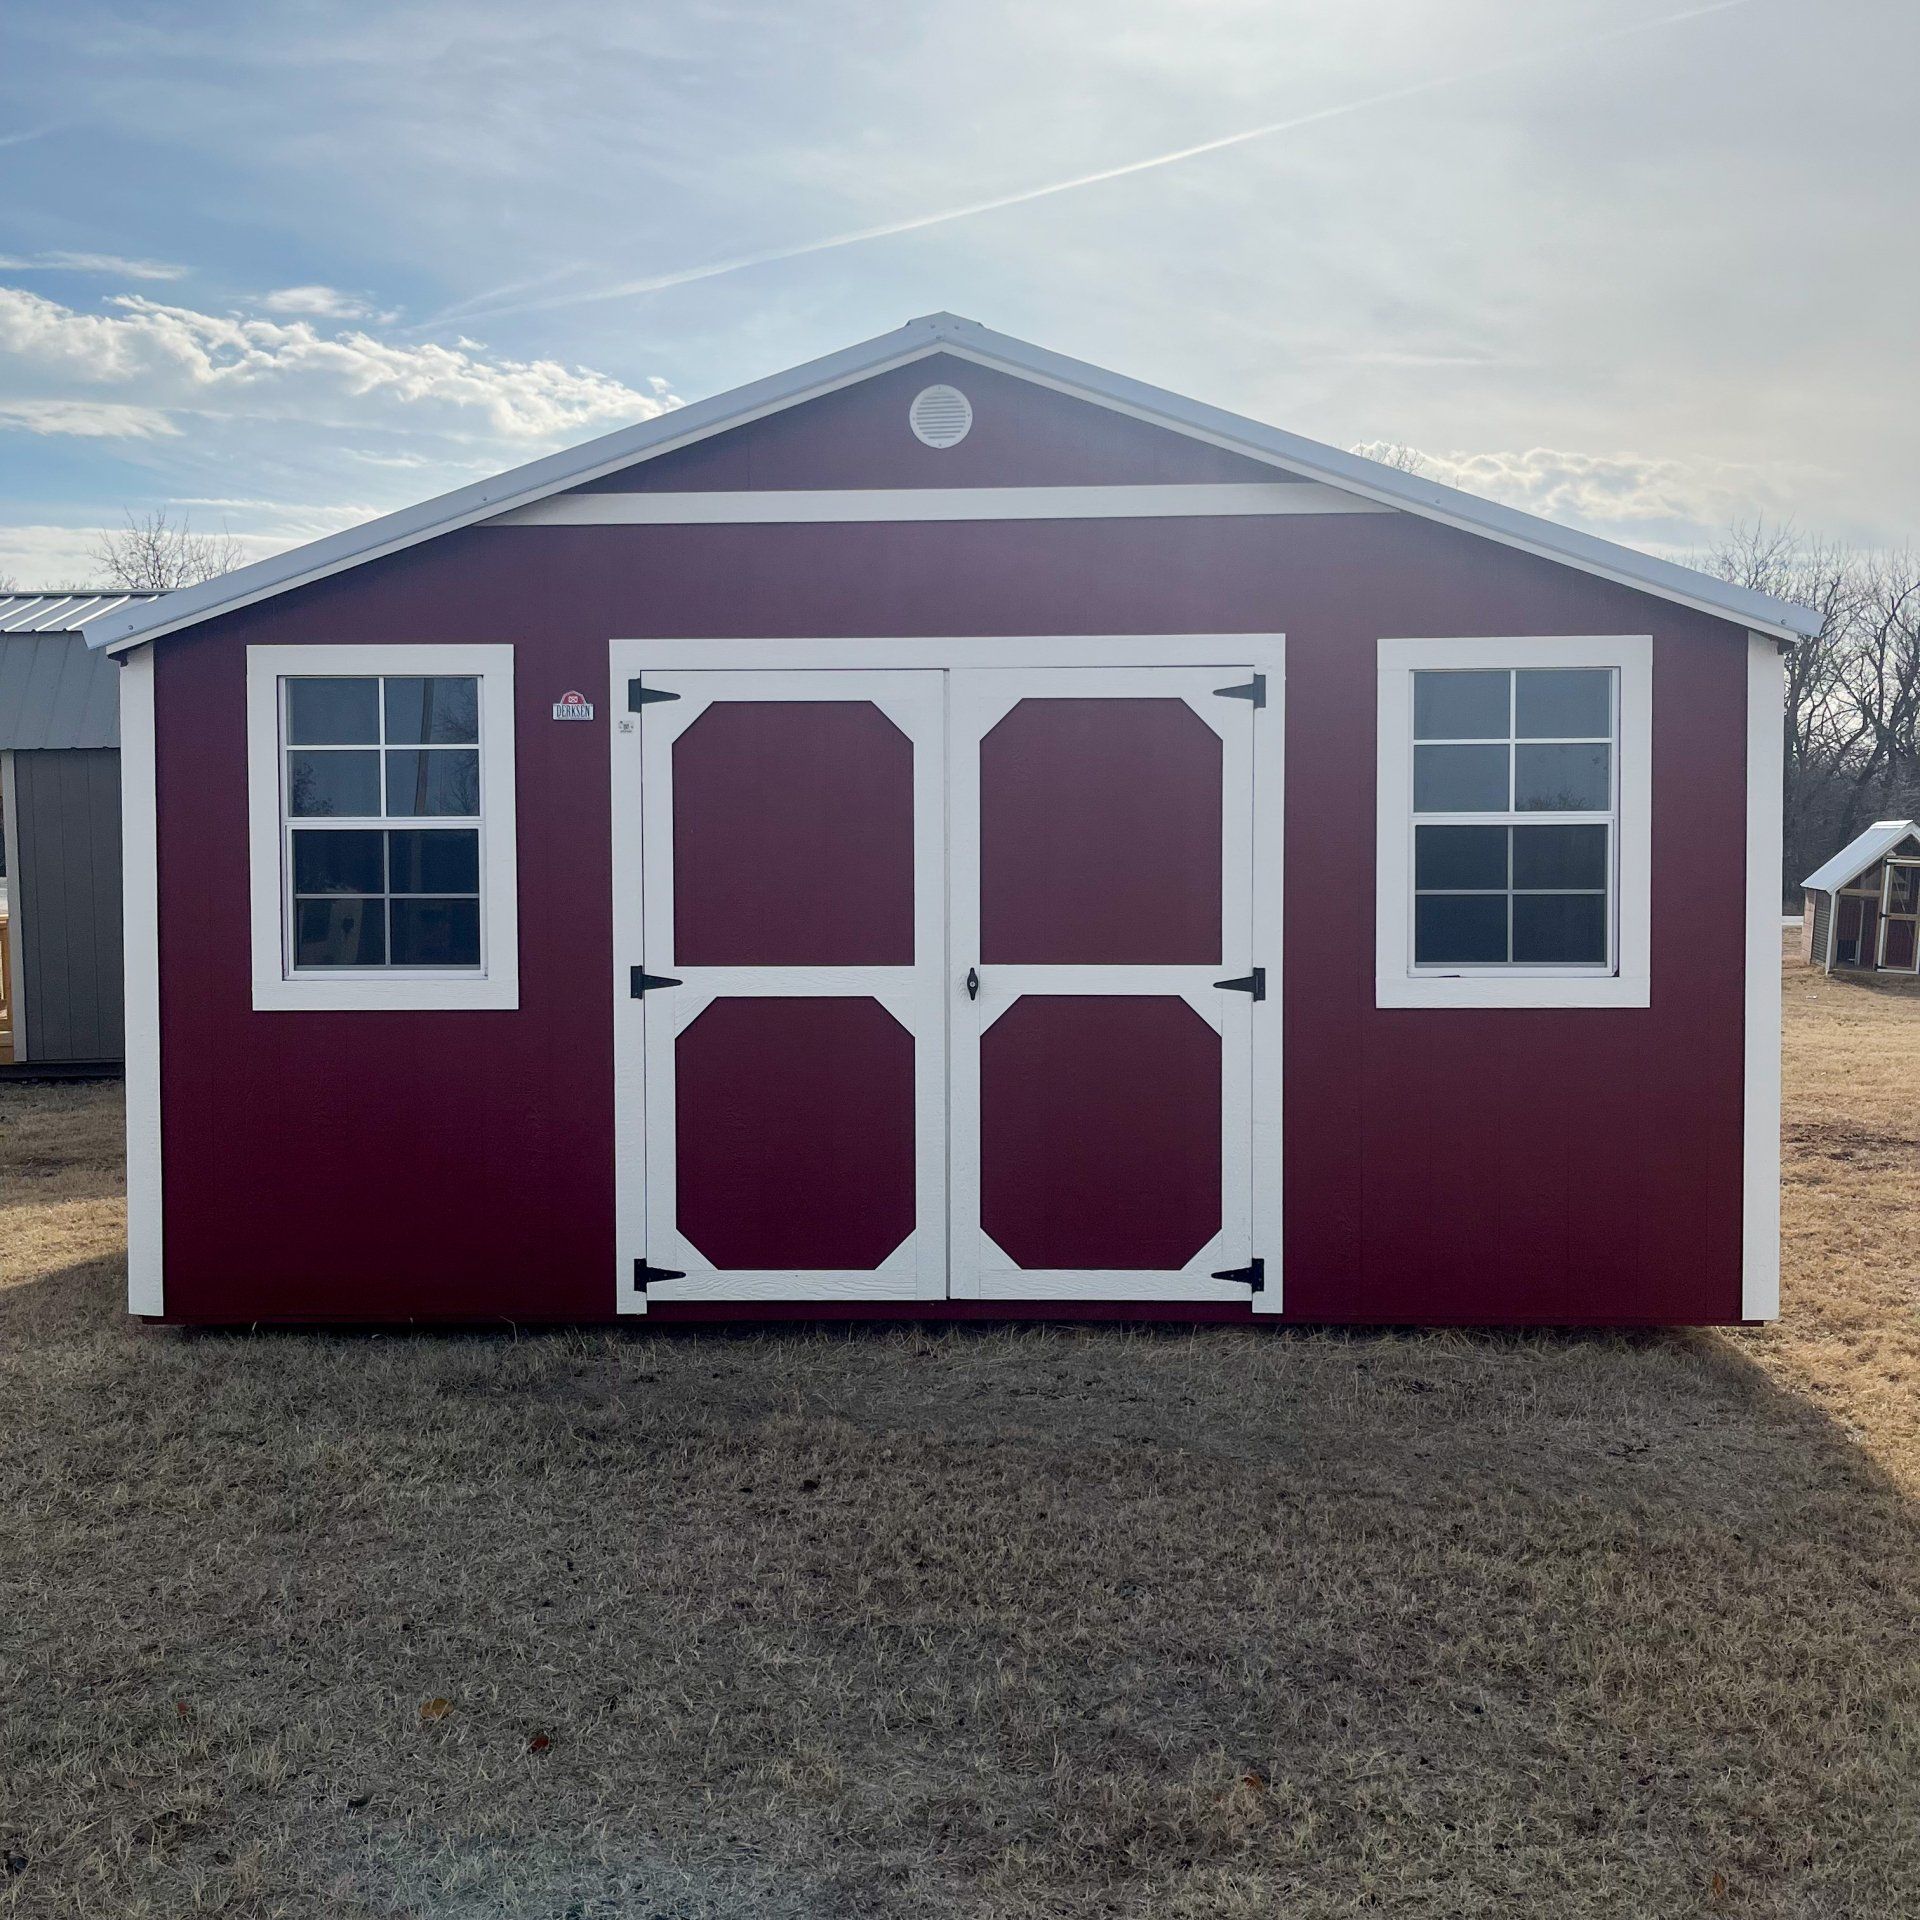 A red side utility  shed with white trim and windows is sitting on top of a dirt field.